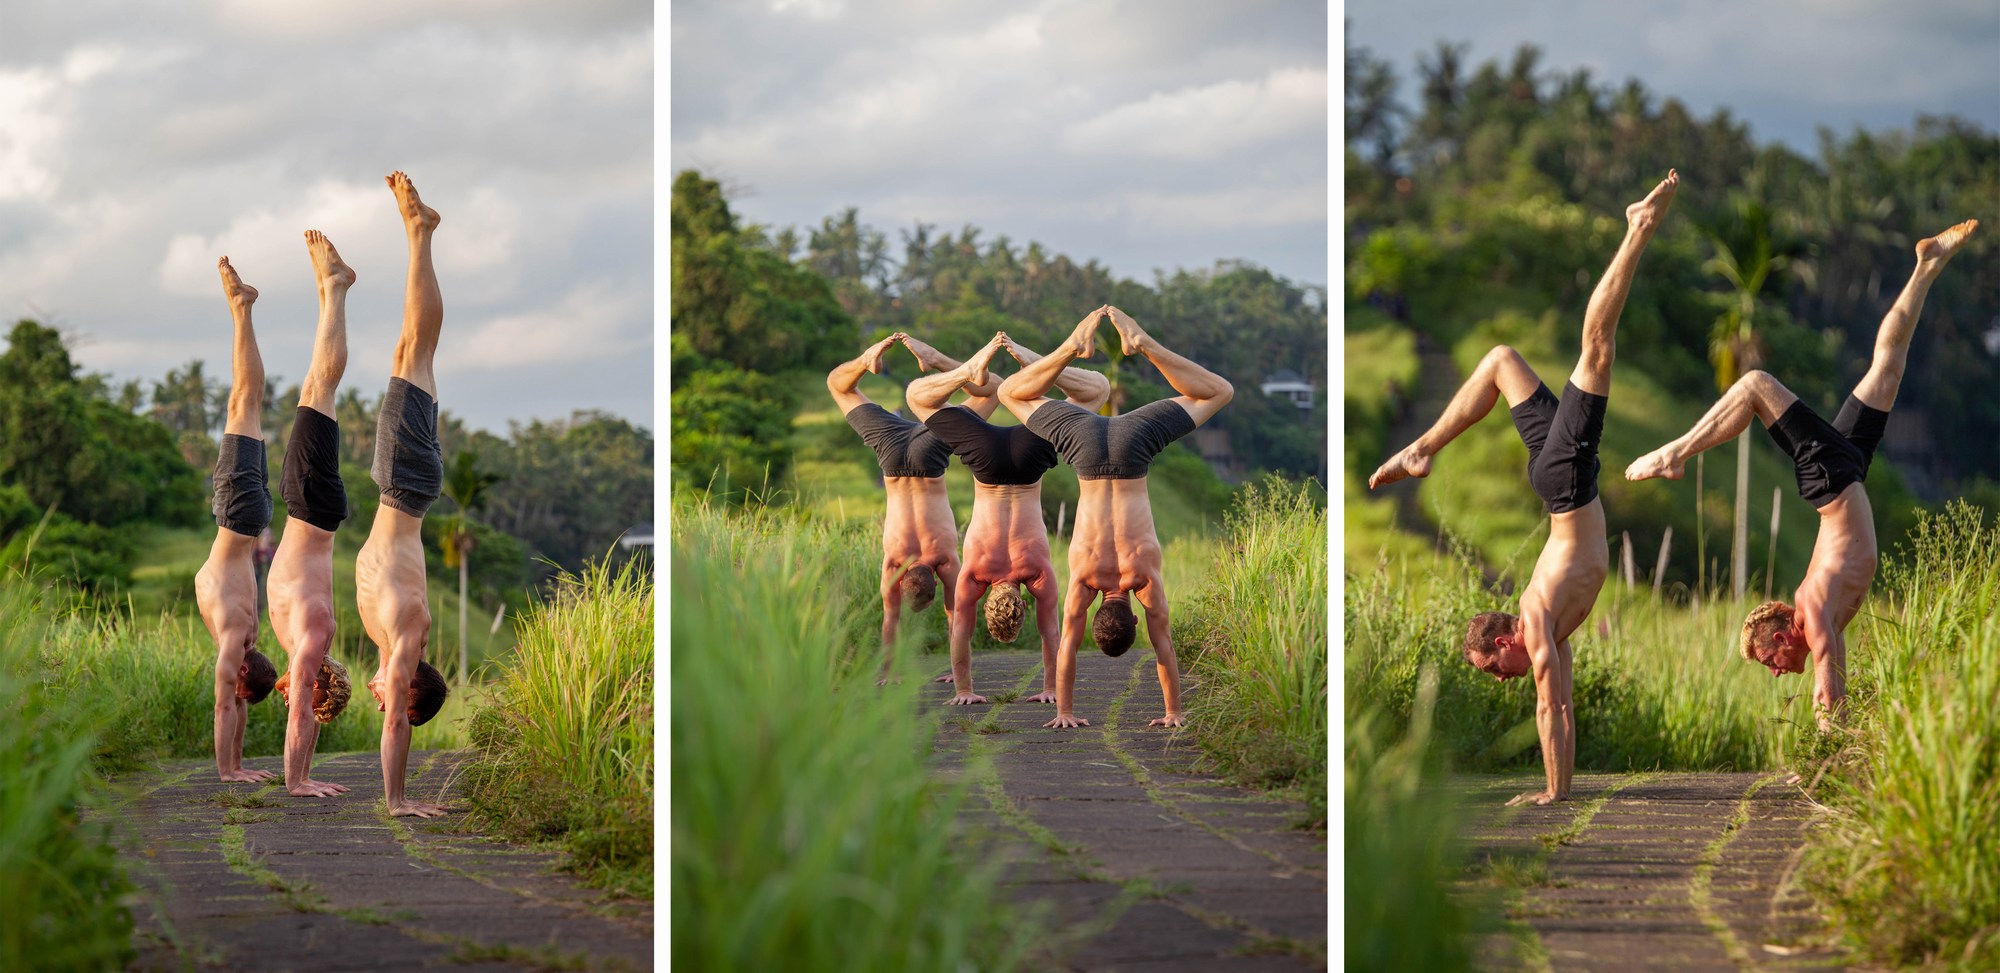 Three guys doing handstands in a collage next to each other.